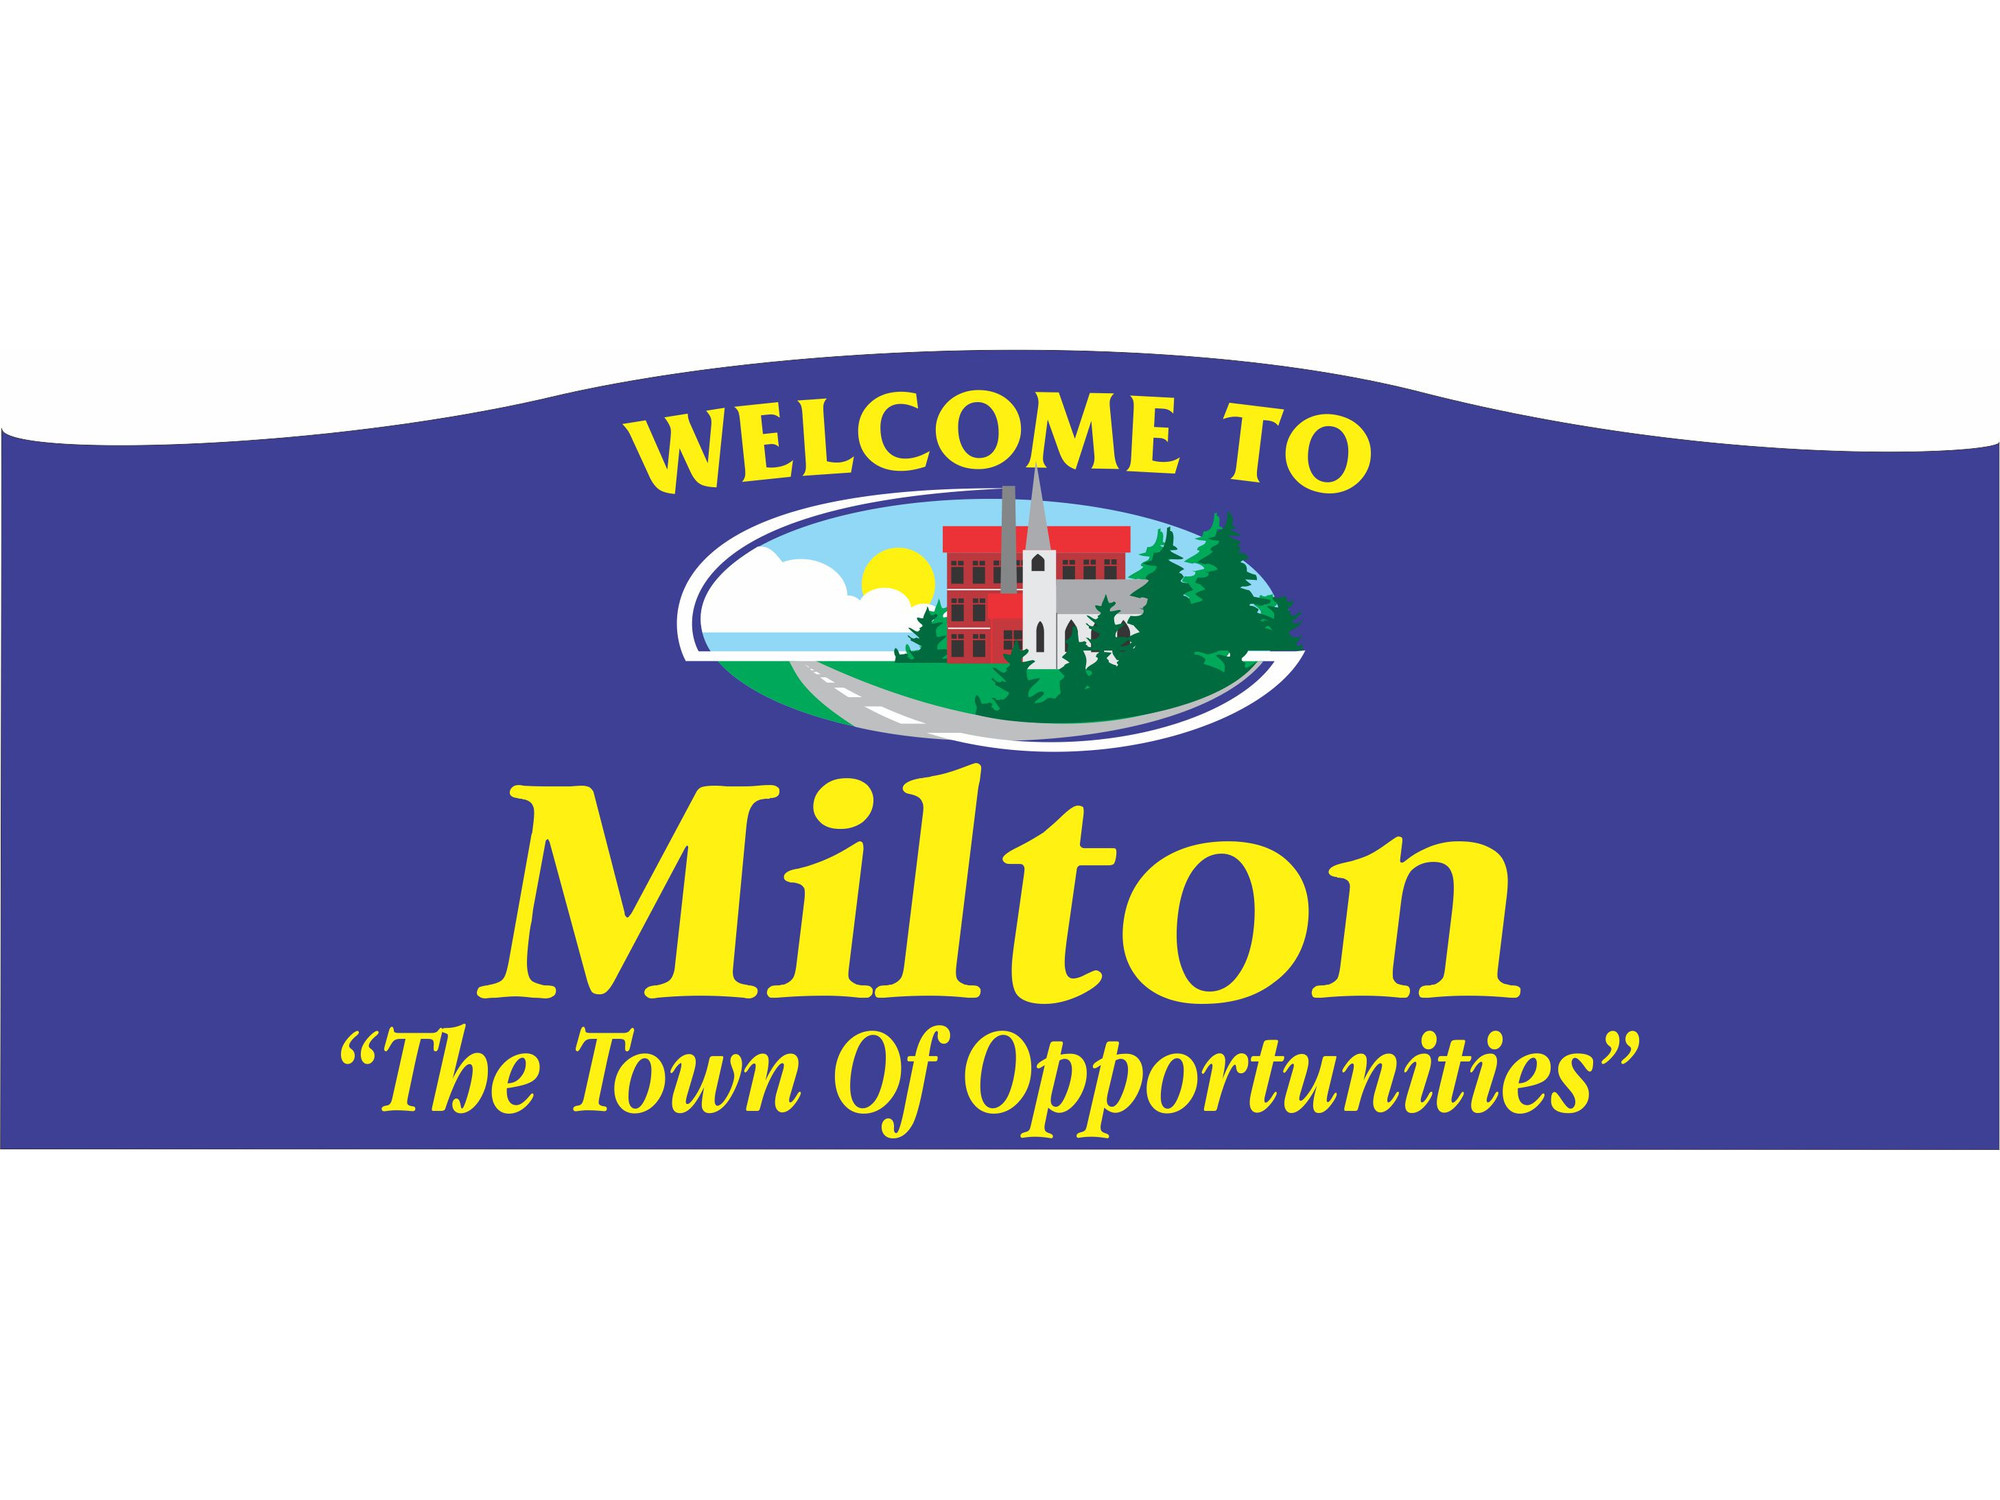 Welcome to Milton sign design